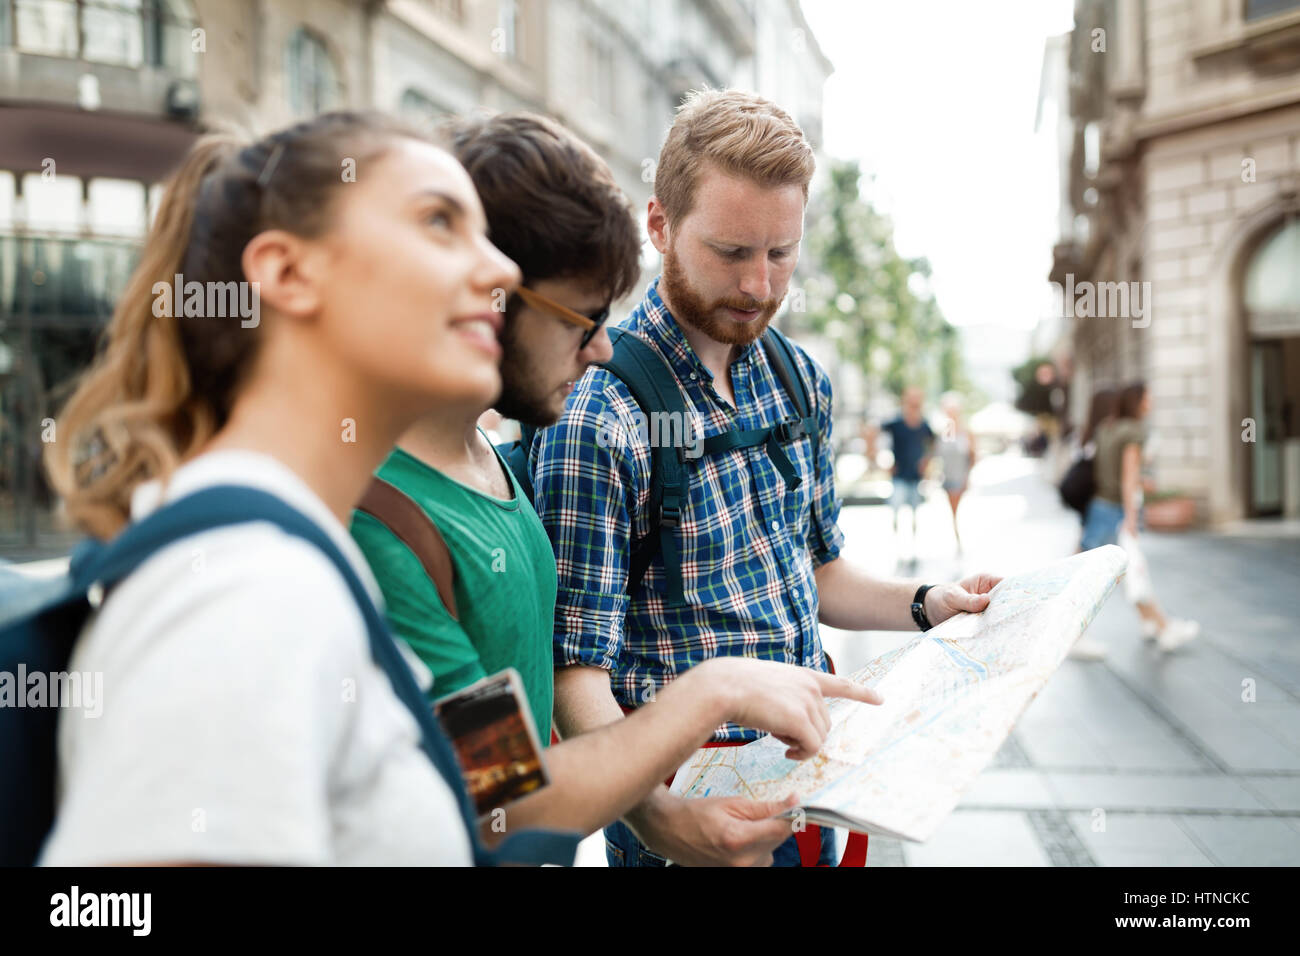 Happy group of students on sightseeing and travel adventure Stock Photo